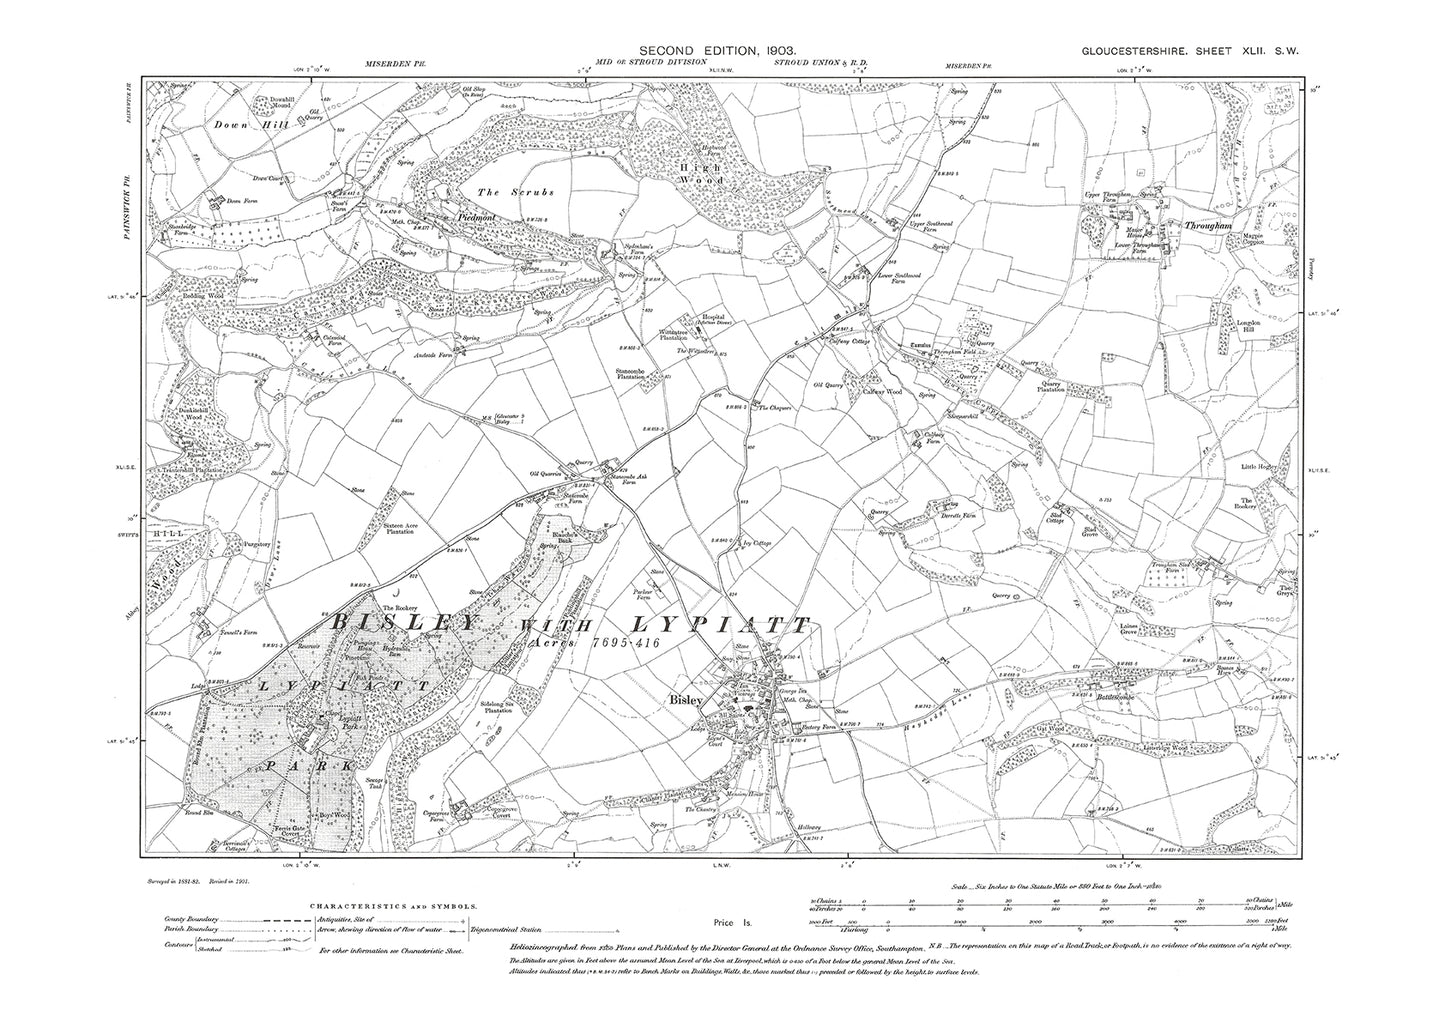 Old OS map dated 1903, showing Bisley in Gloucestershire - 42SW